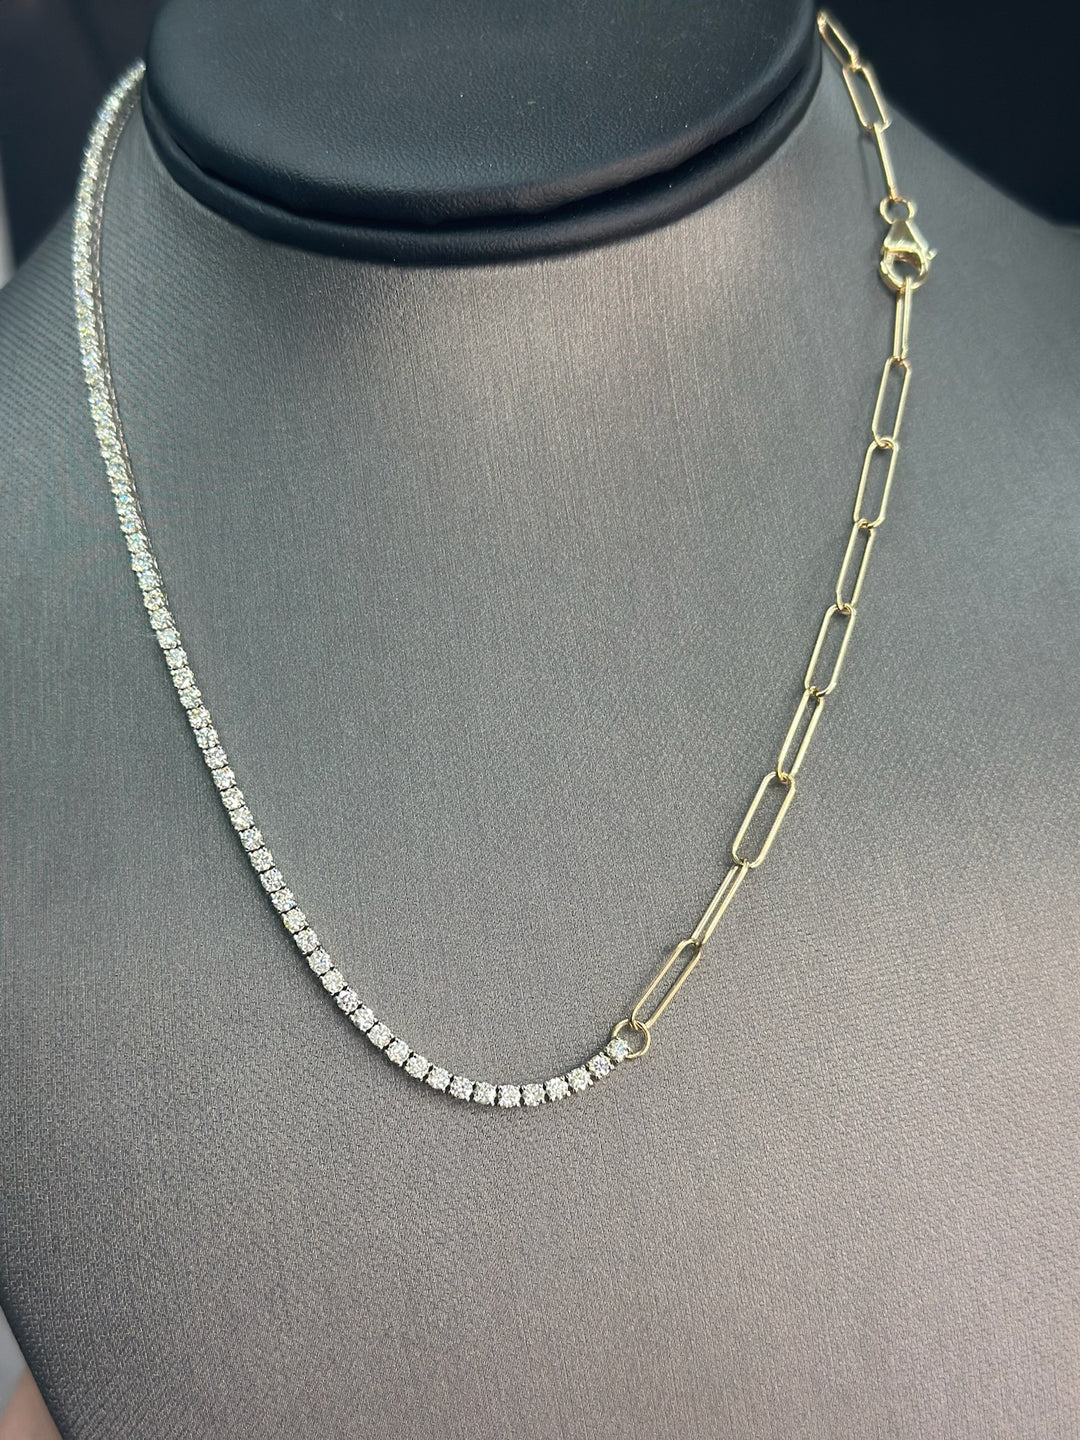 Piazza - Halfway Adjustable Diamond Tennis Necklace With Paperclip Chain